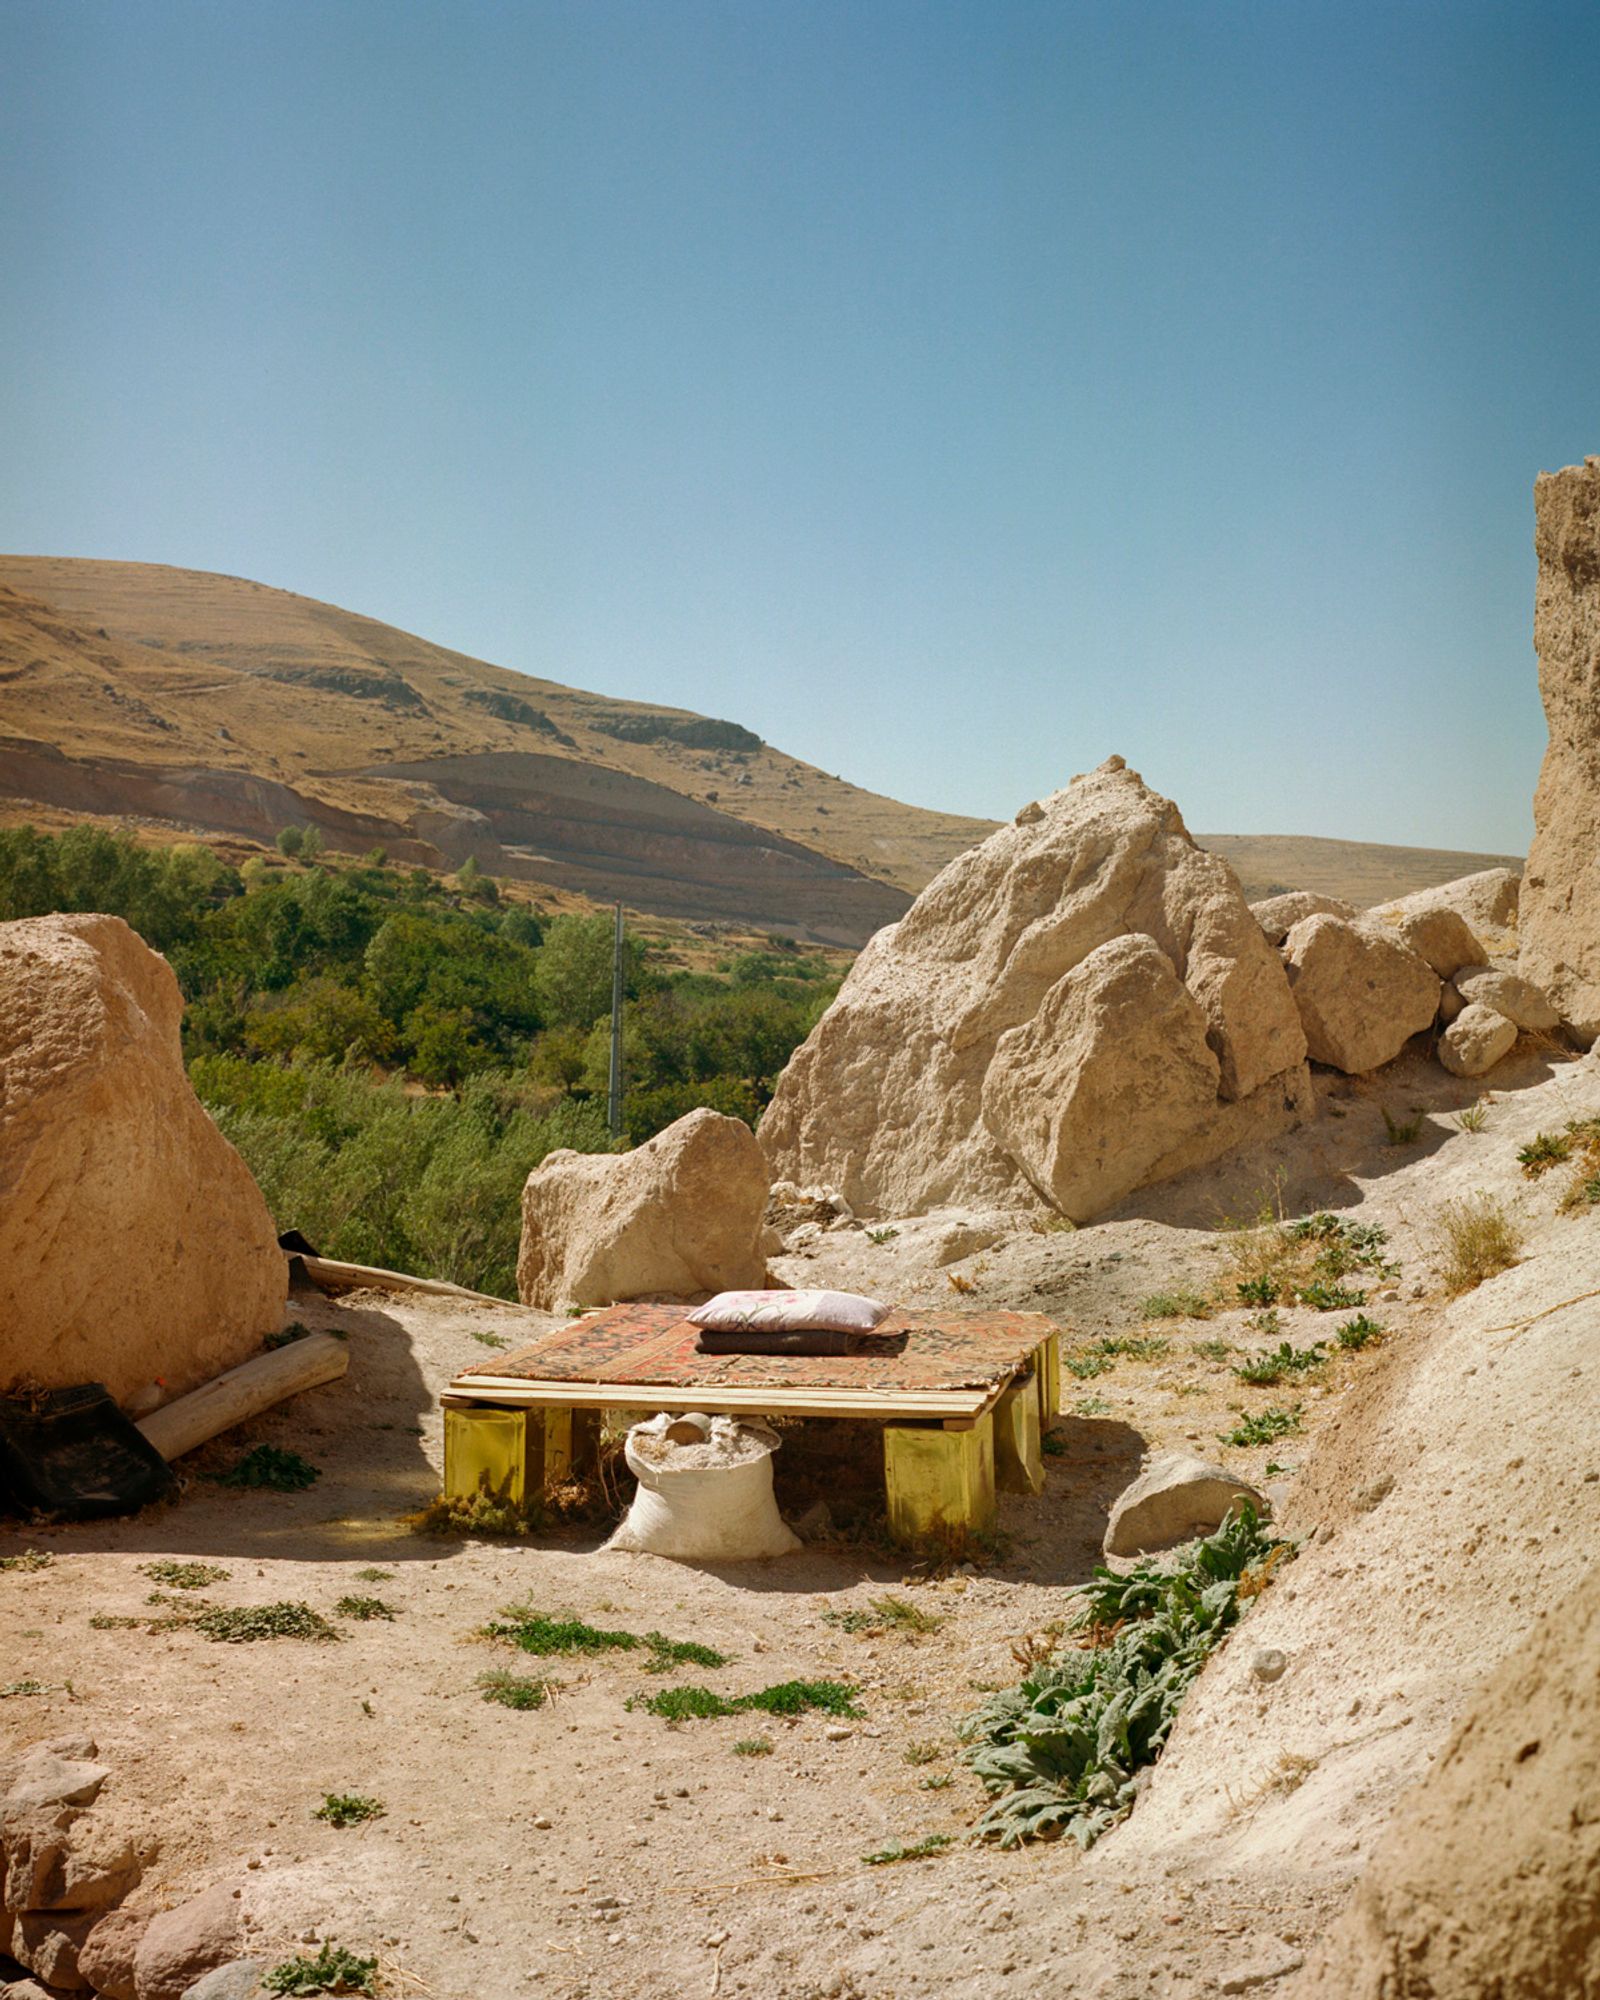 © Sarah Pannell - Image from the Tabriz to Shiraz photography project